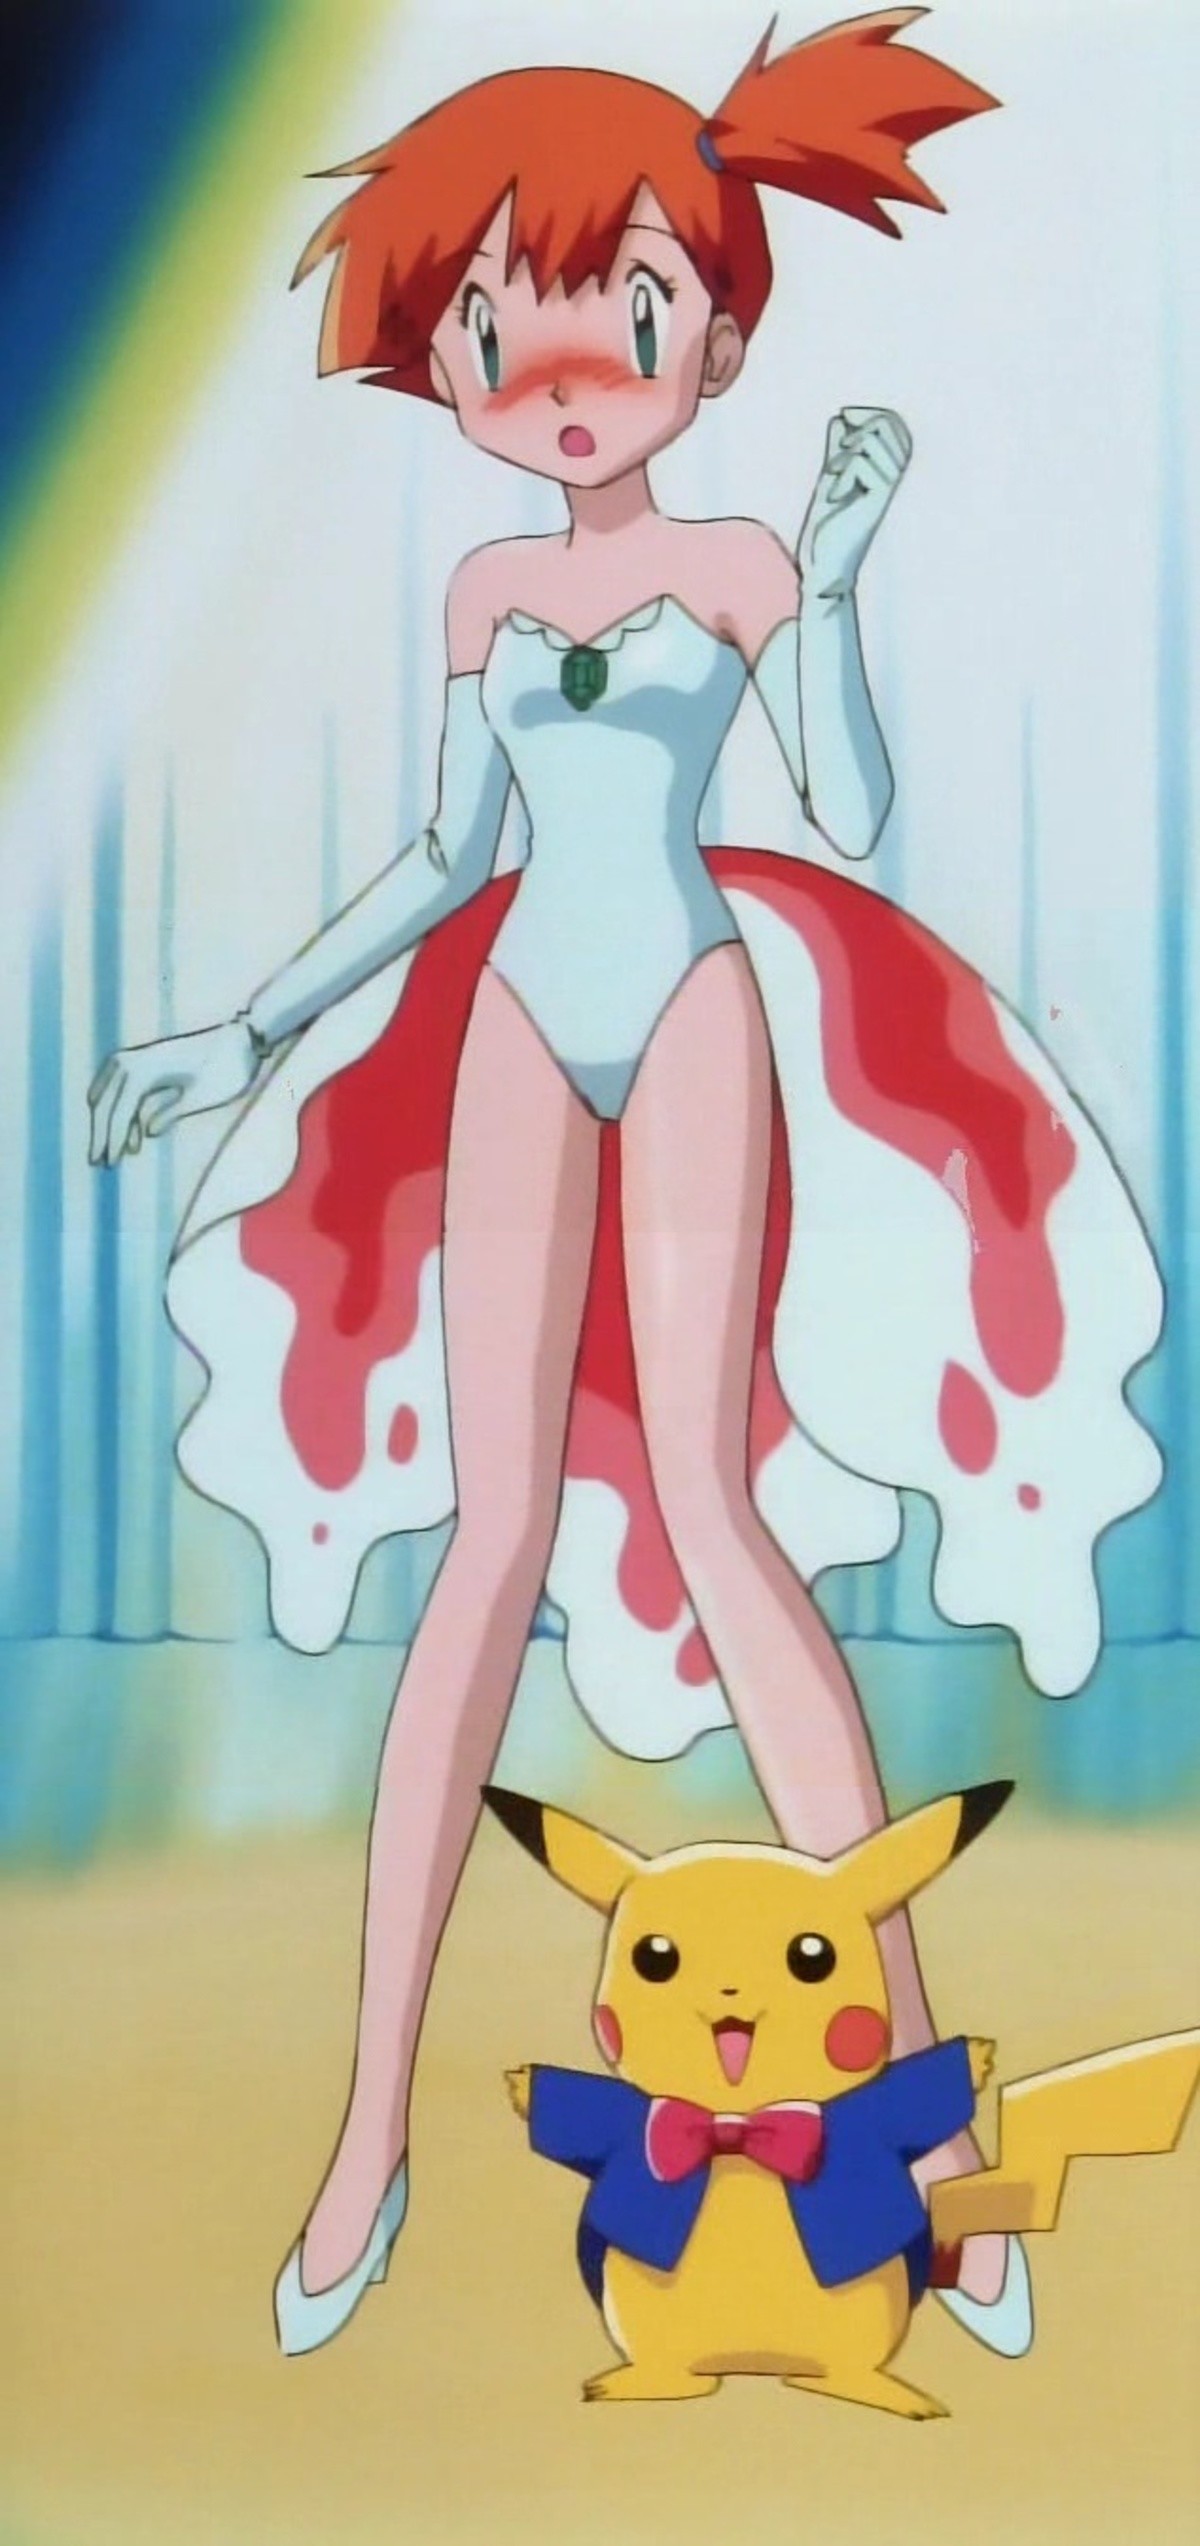 Reminder of how Misty looked in the Electric Tale of Pikachu. 